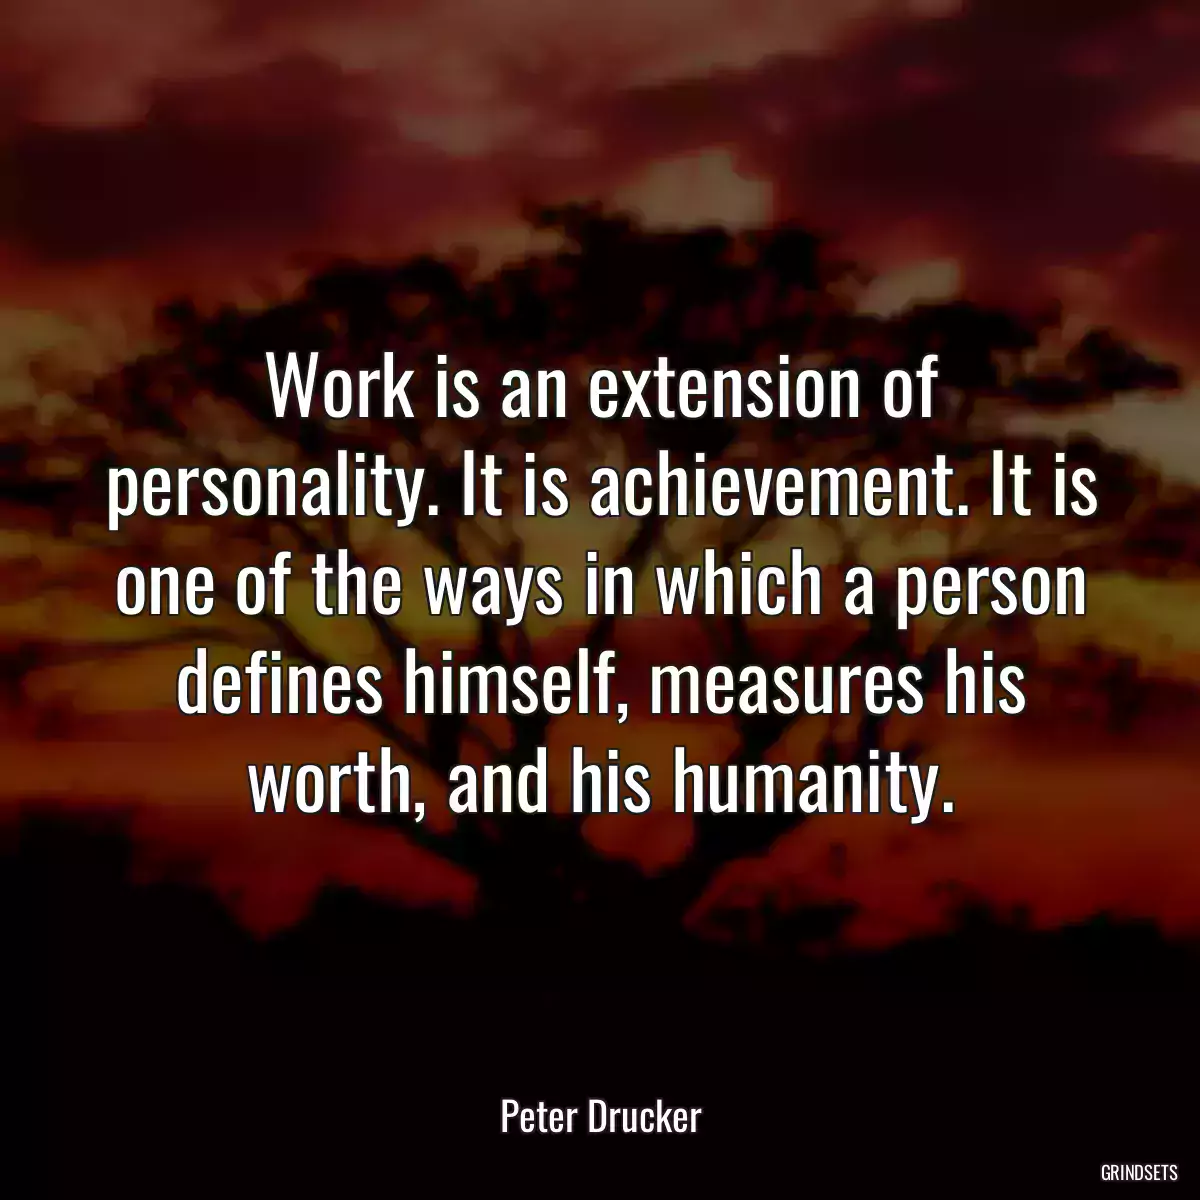 Work is an extension of personality. It is achievement. It is one of the ways in which a person defines himself, measures his worth, and his humanity.